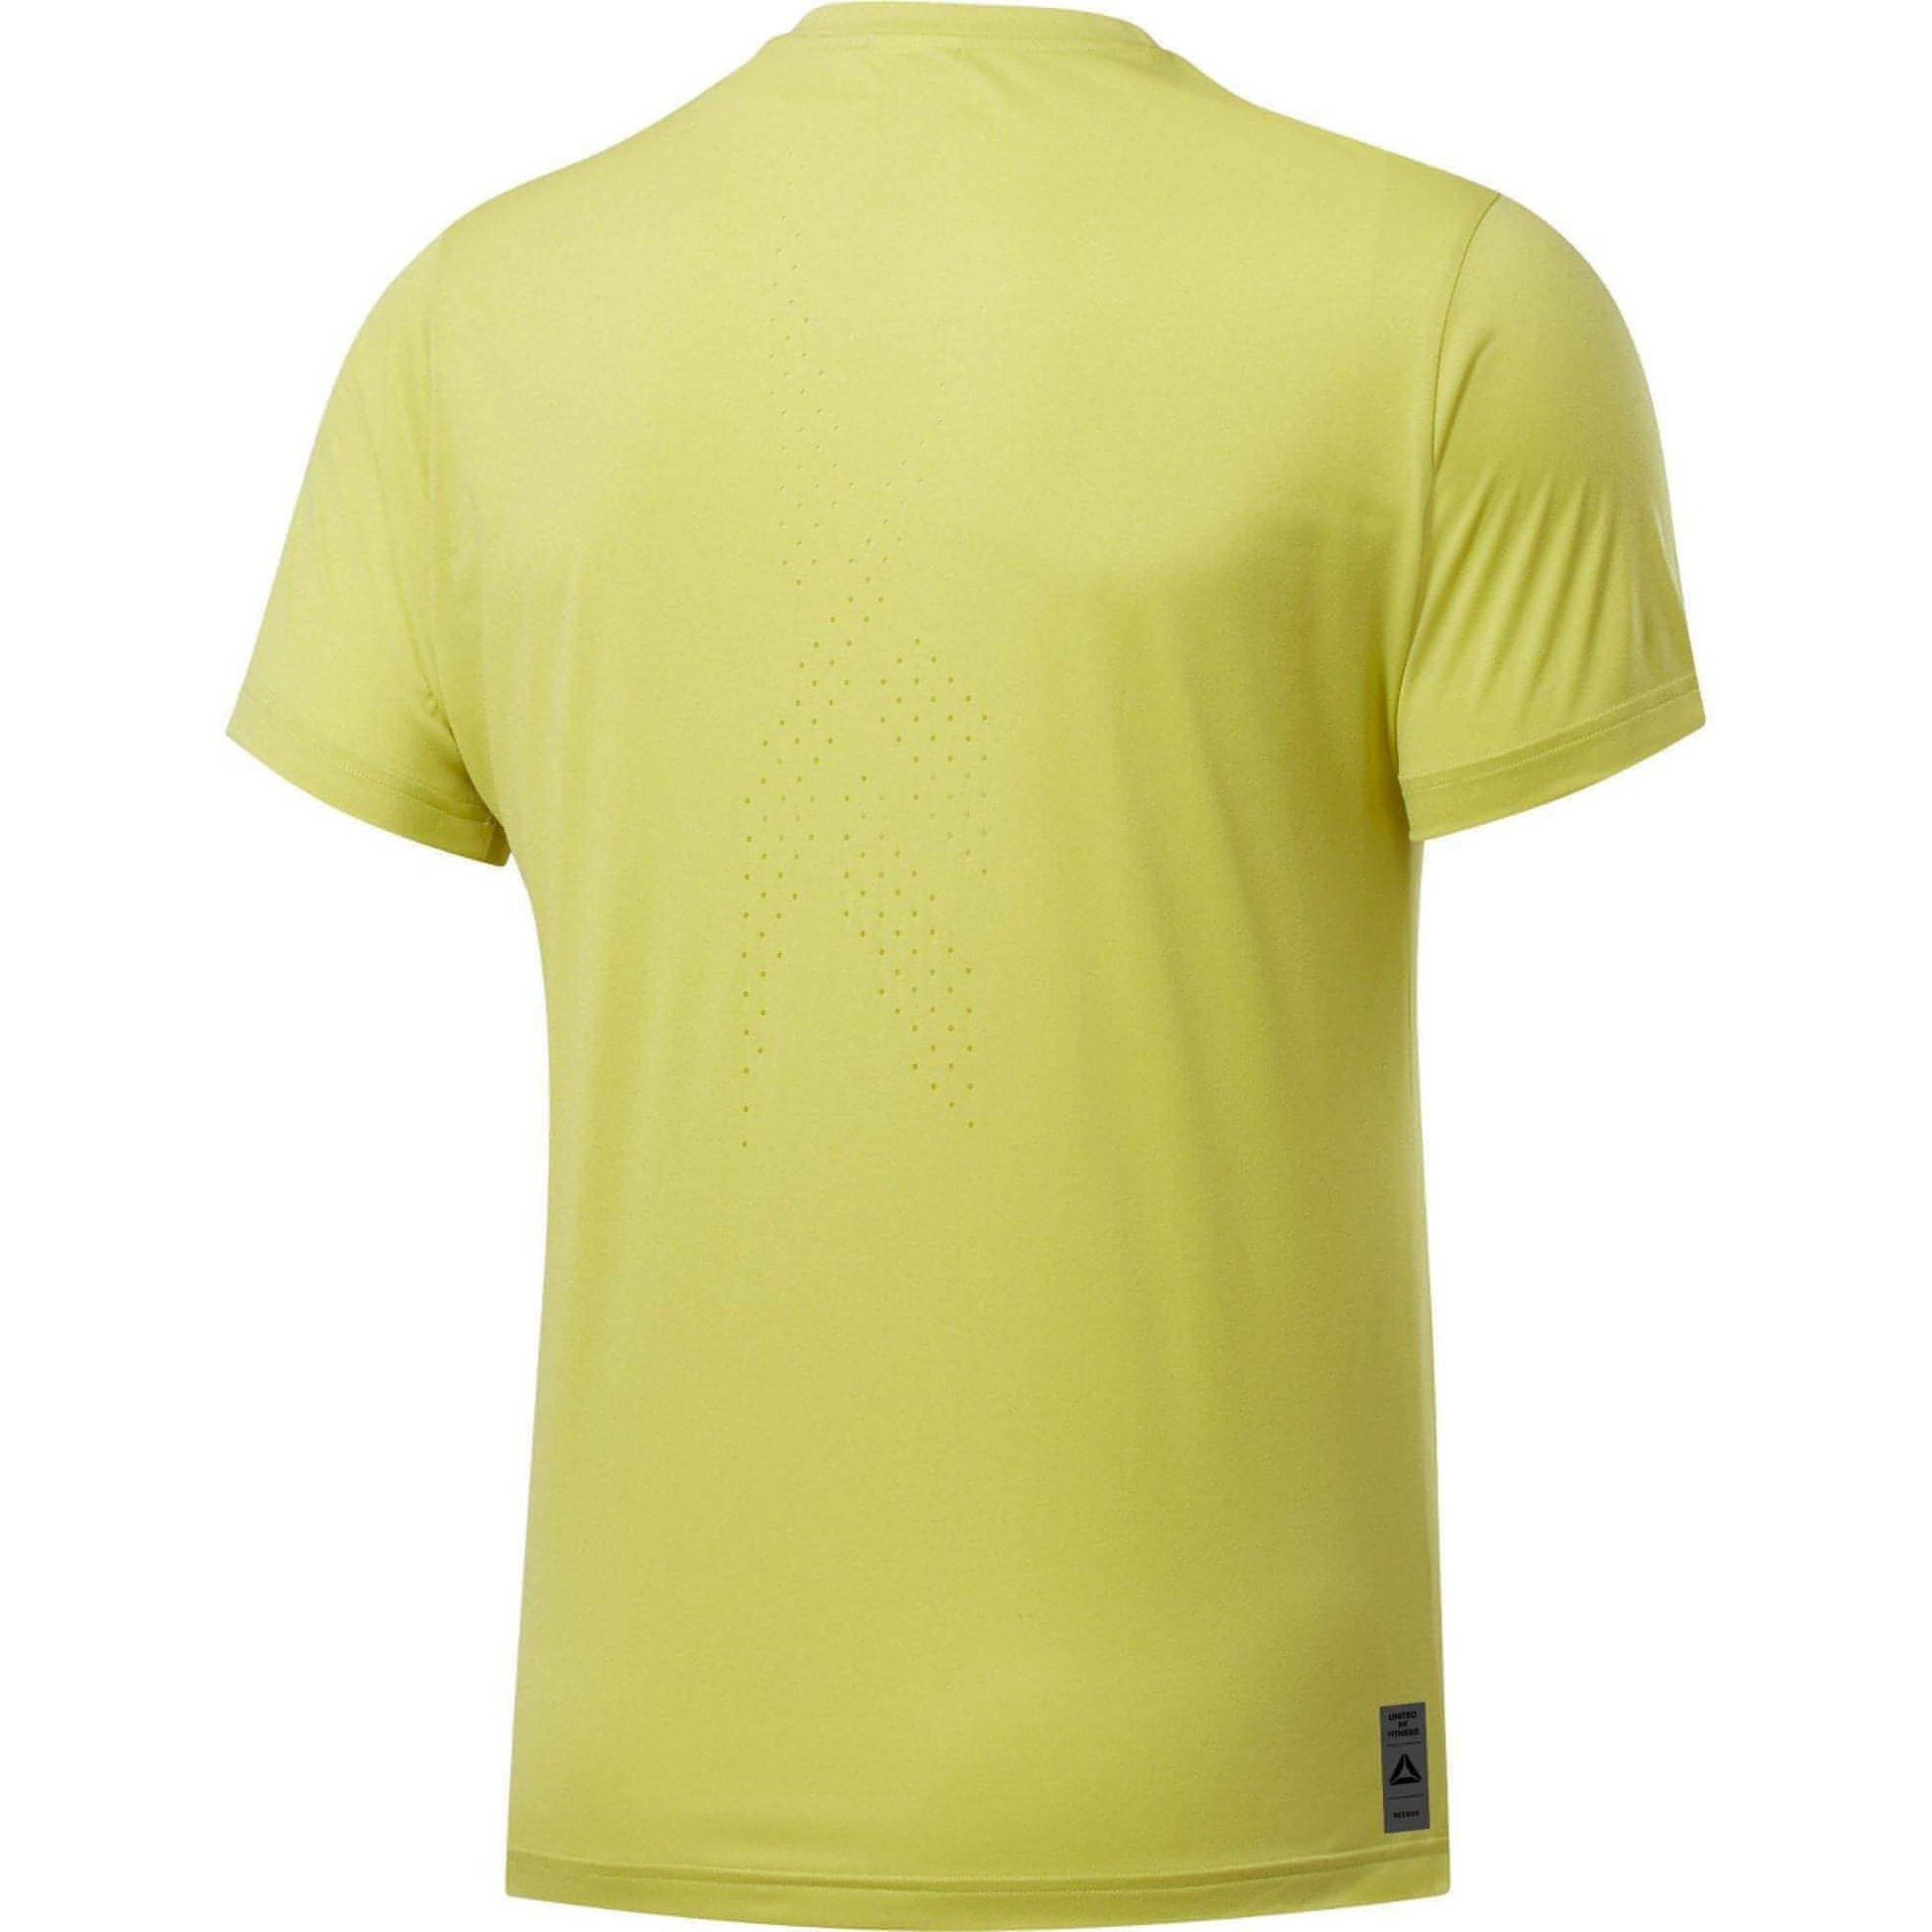 Reebok United by Fitness Perforated Short Sleeve Mens Training Top - Yellow - Start Fitness